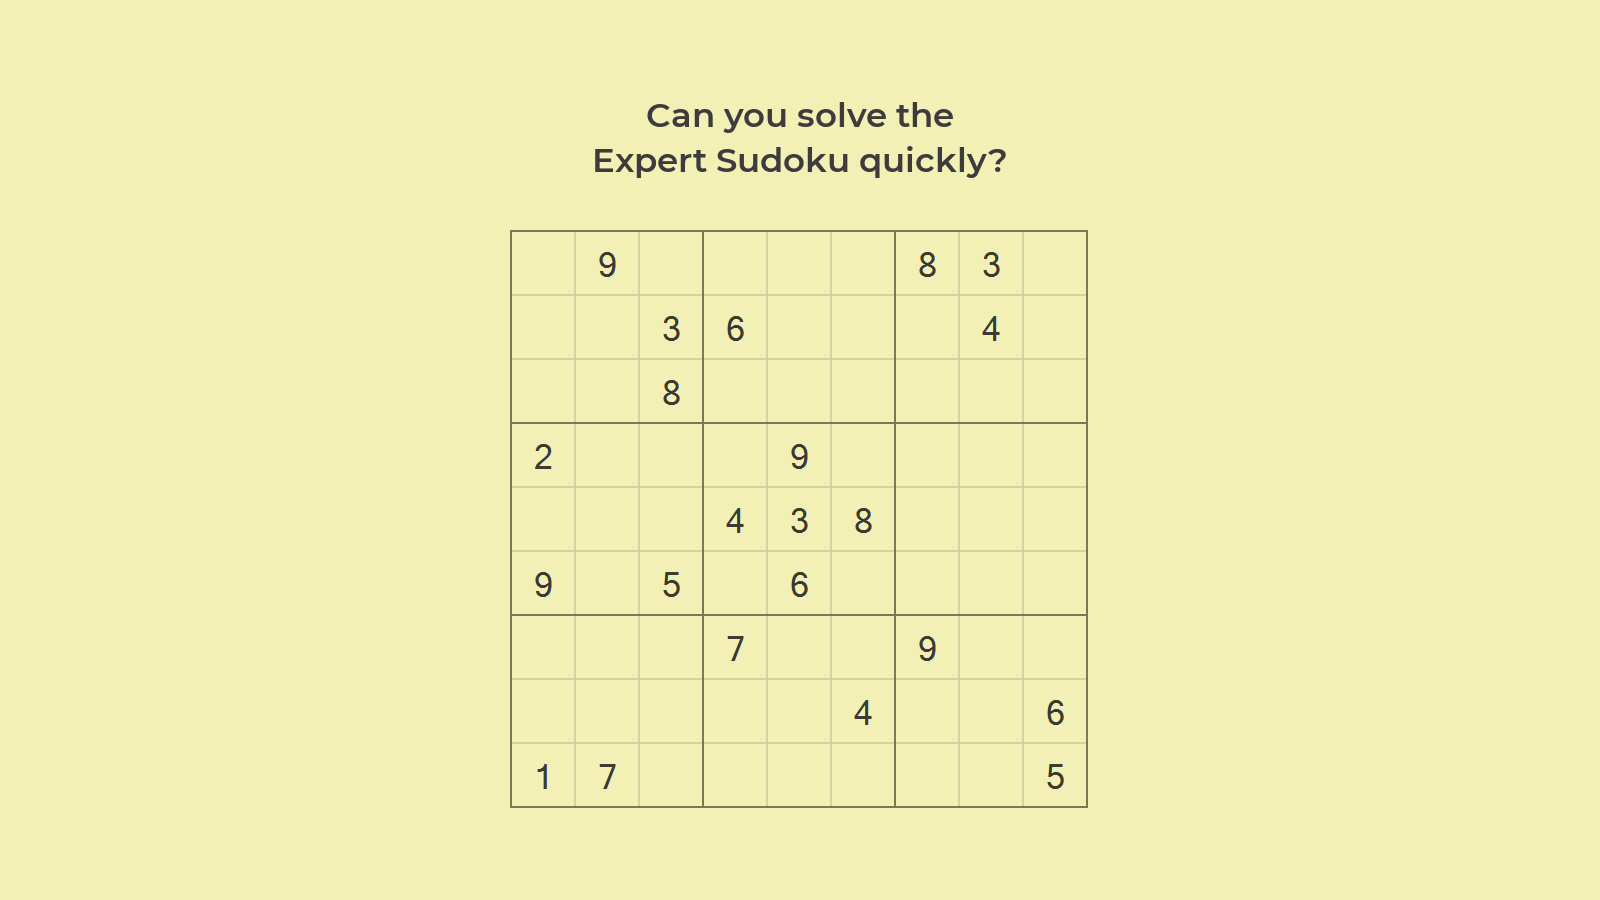 Solving Sudoku Expert Level 5 Game 10 Quickly